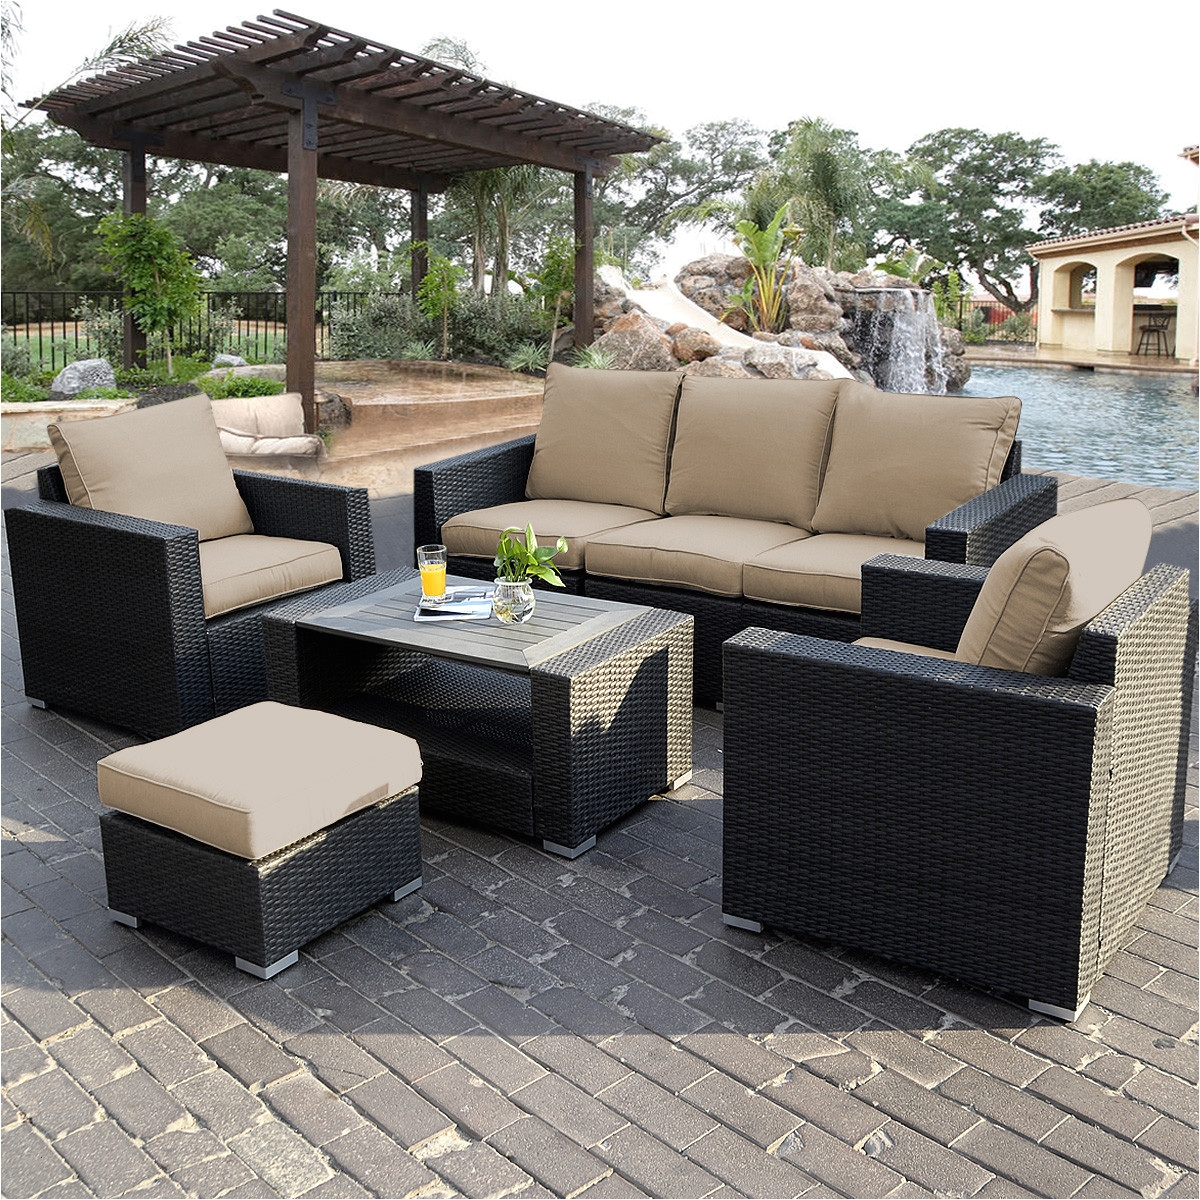 small outdoor furniture lovely pretty wicker outdoor furniture sale 26 sofa 0d patio chairs scheme